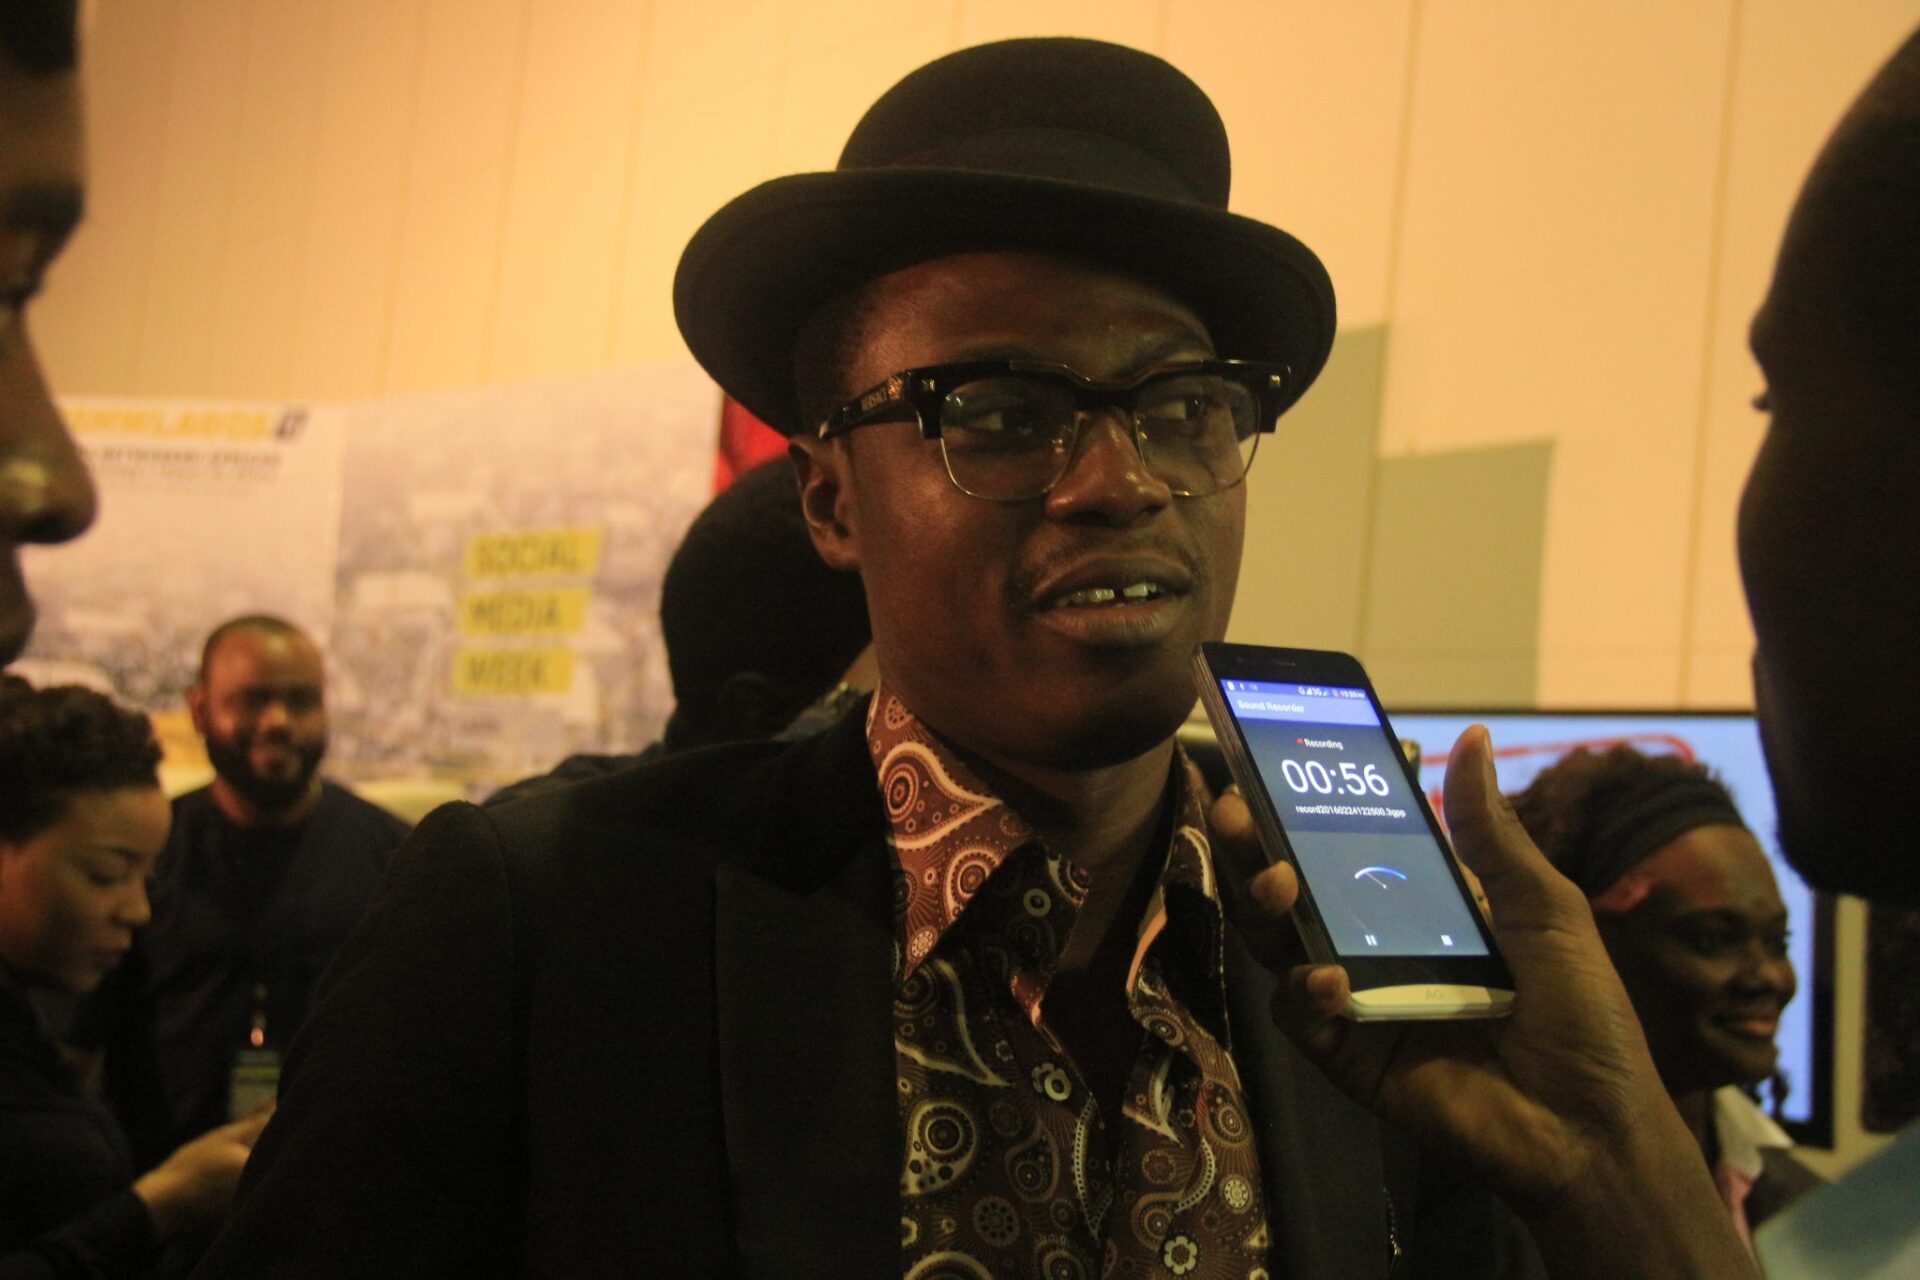 Sound Sultan (left) in an interview with author at the 2016 Social Media Week Lagos